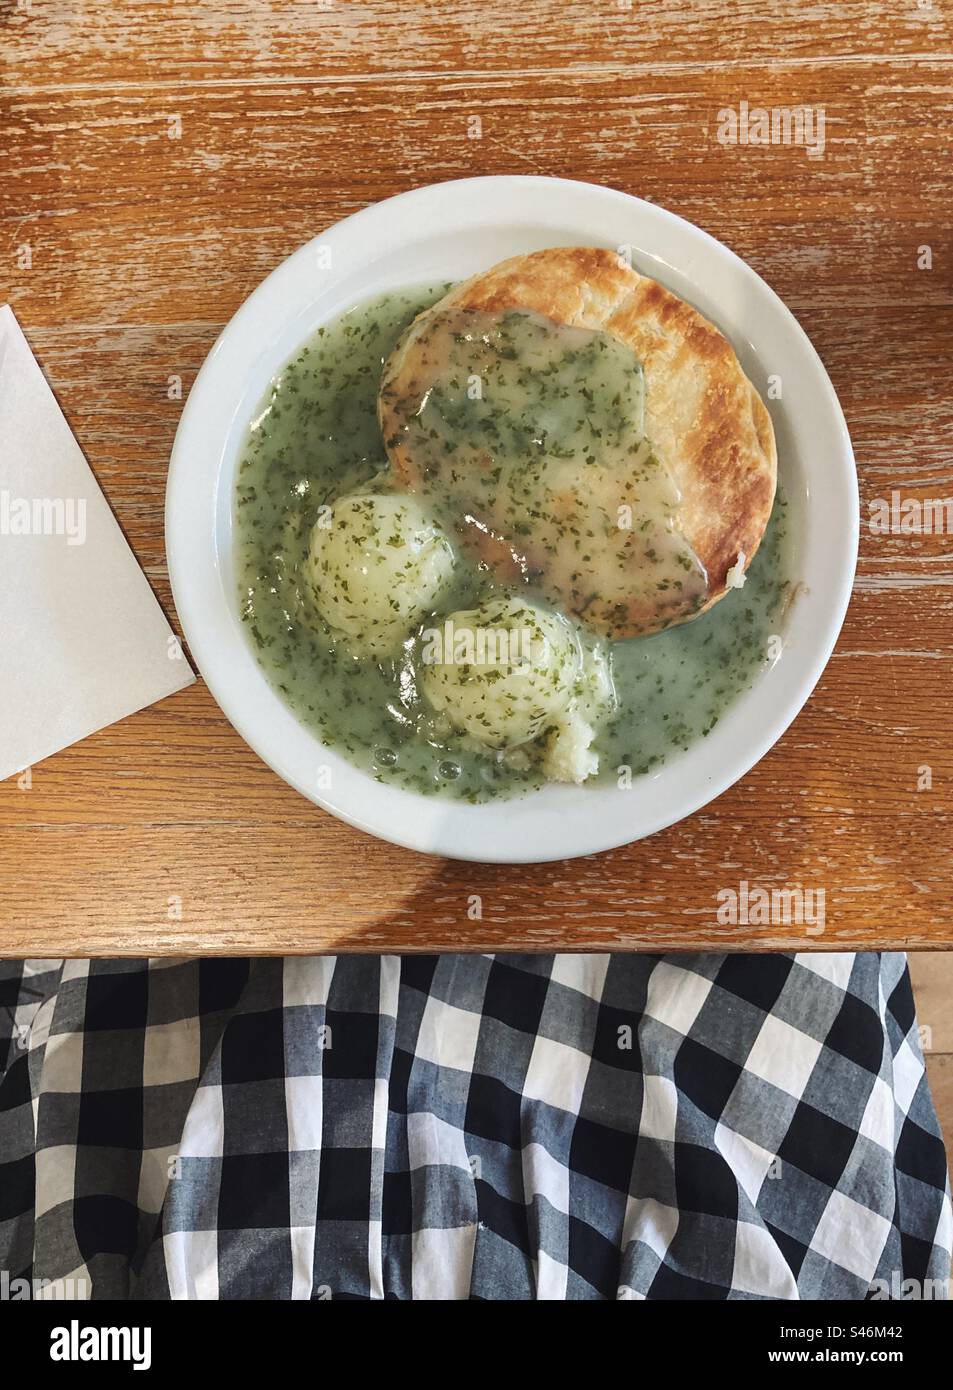 Pie, mash and Liquor from Goddards at Greenwich, London Stock Photo